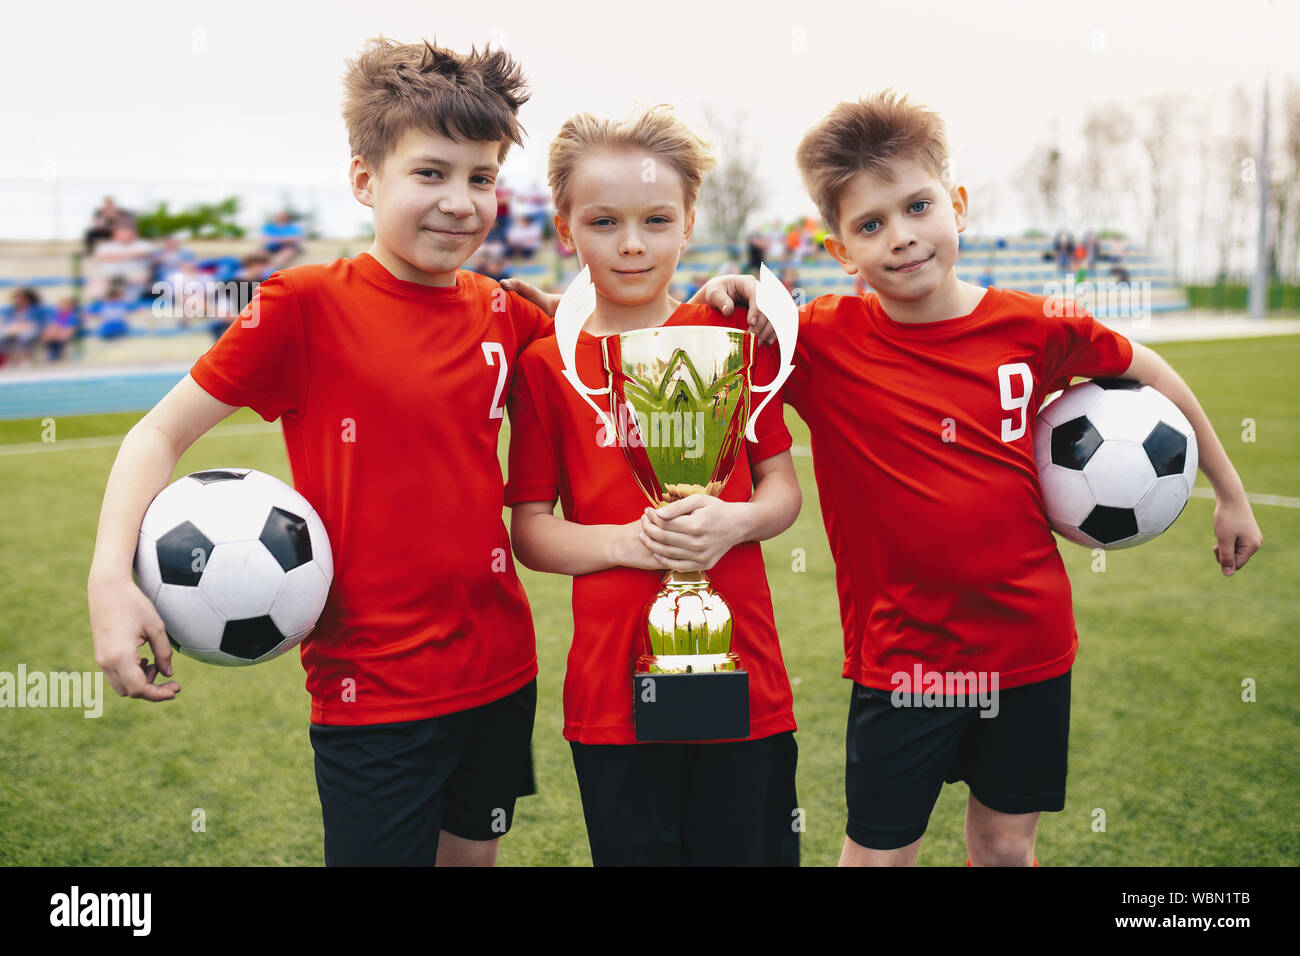 Three Happy Cheerful Kids of Sports Soccer Team. Boys Football Players Holding Trophy at the Stadium. Young Winners of Youth Football Tournament Stock Photo